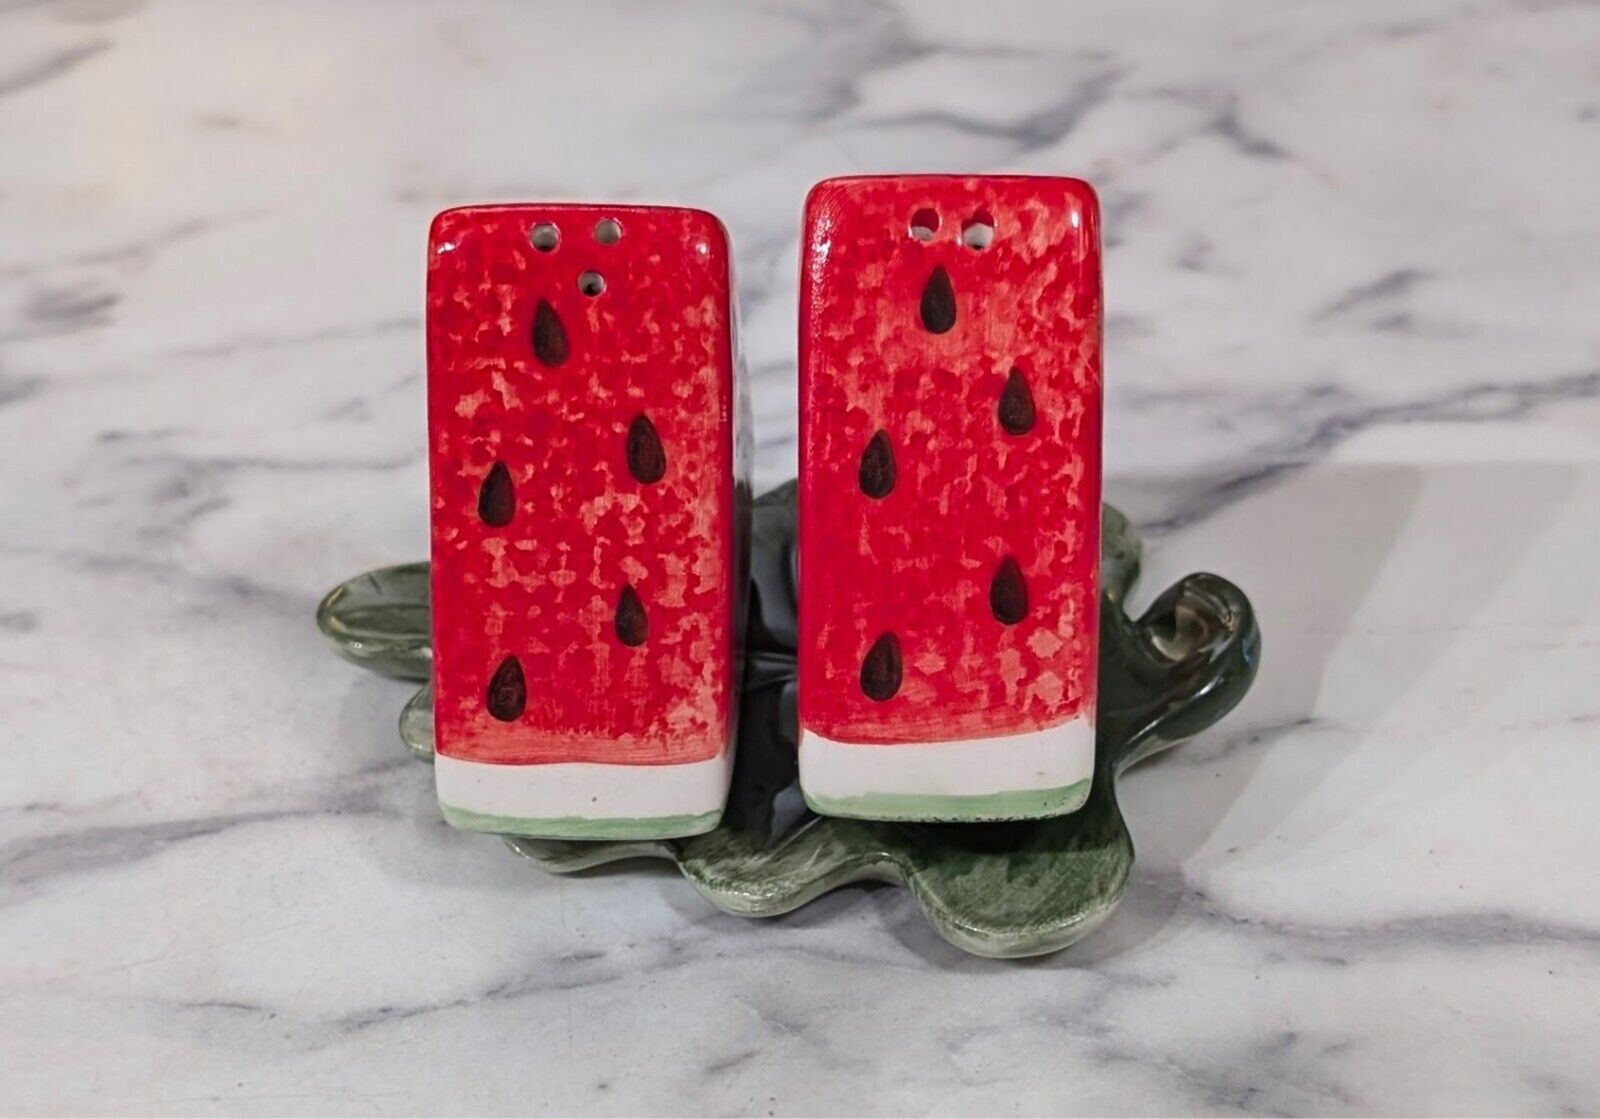 Ceramic Watermelon Slices Salt & Pepper Shakers and Tray - 3 Piece Set